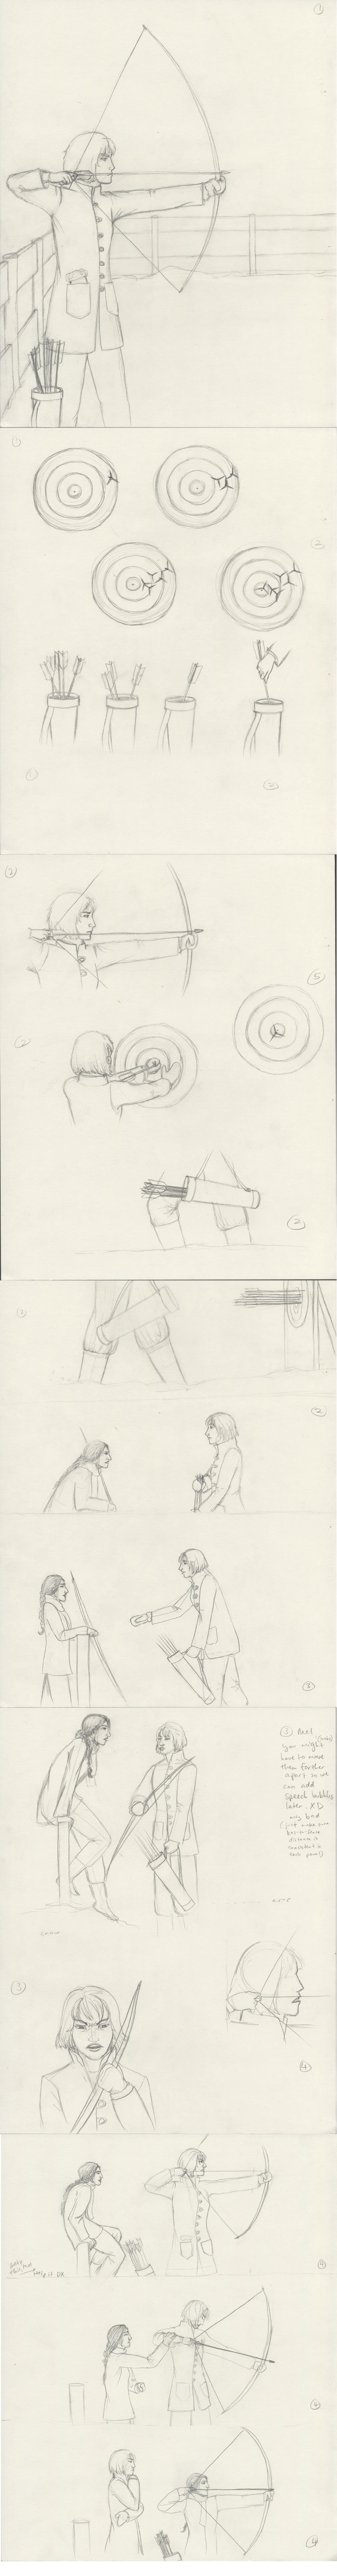 Entry 28 Roughs Part 1